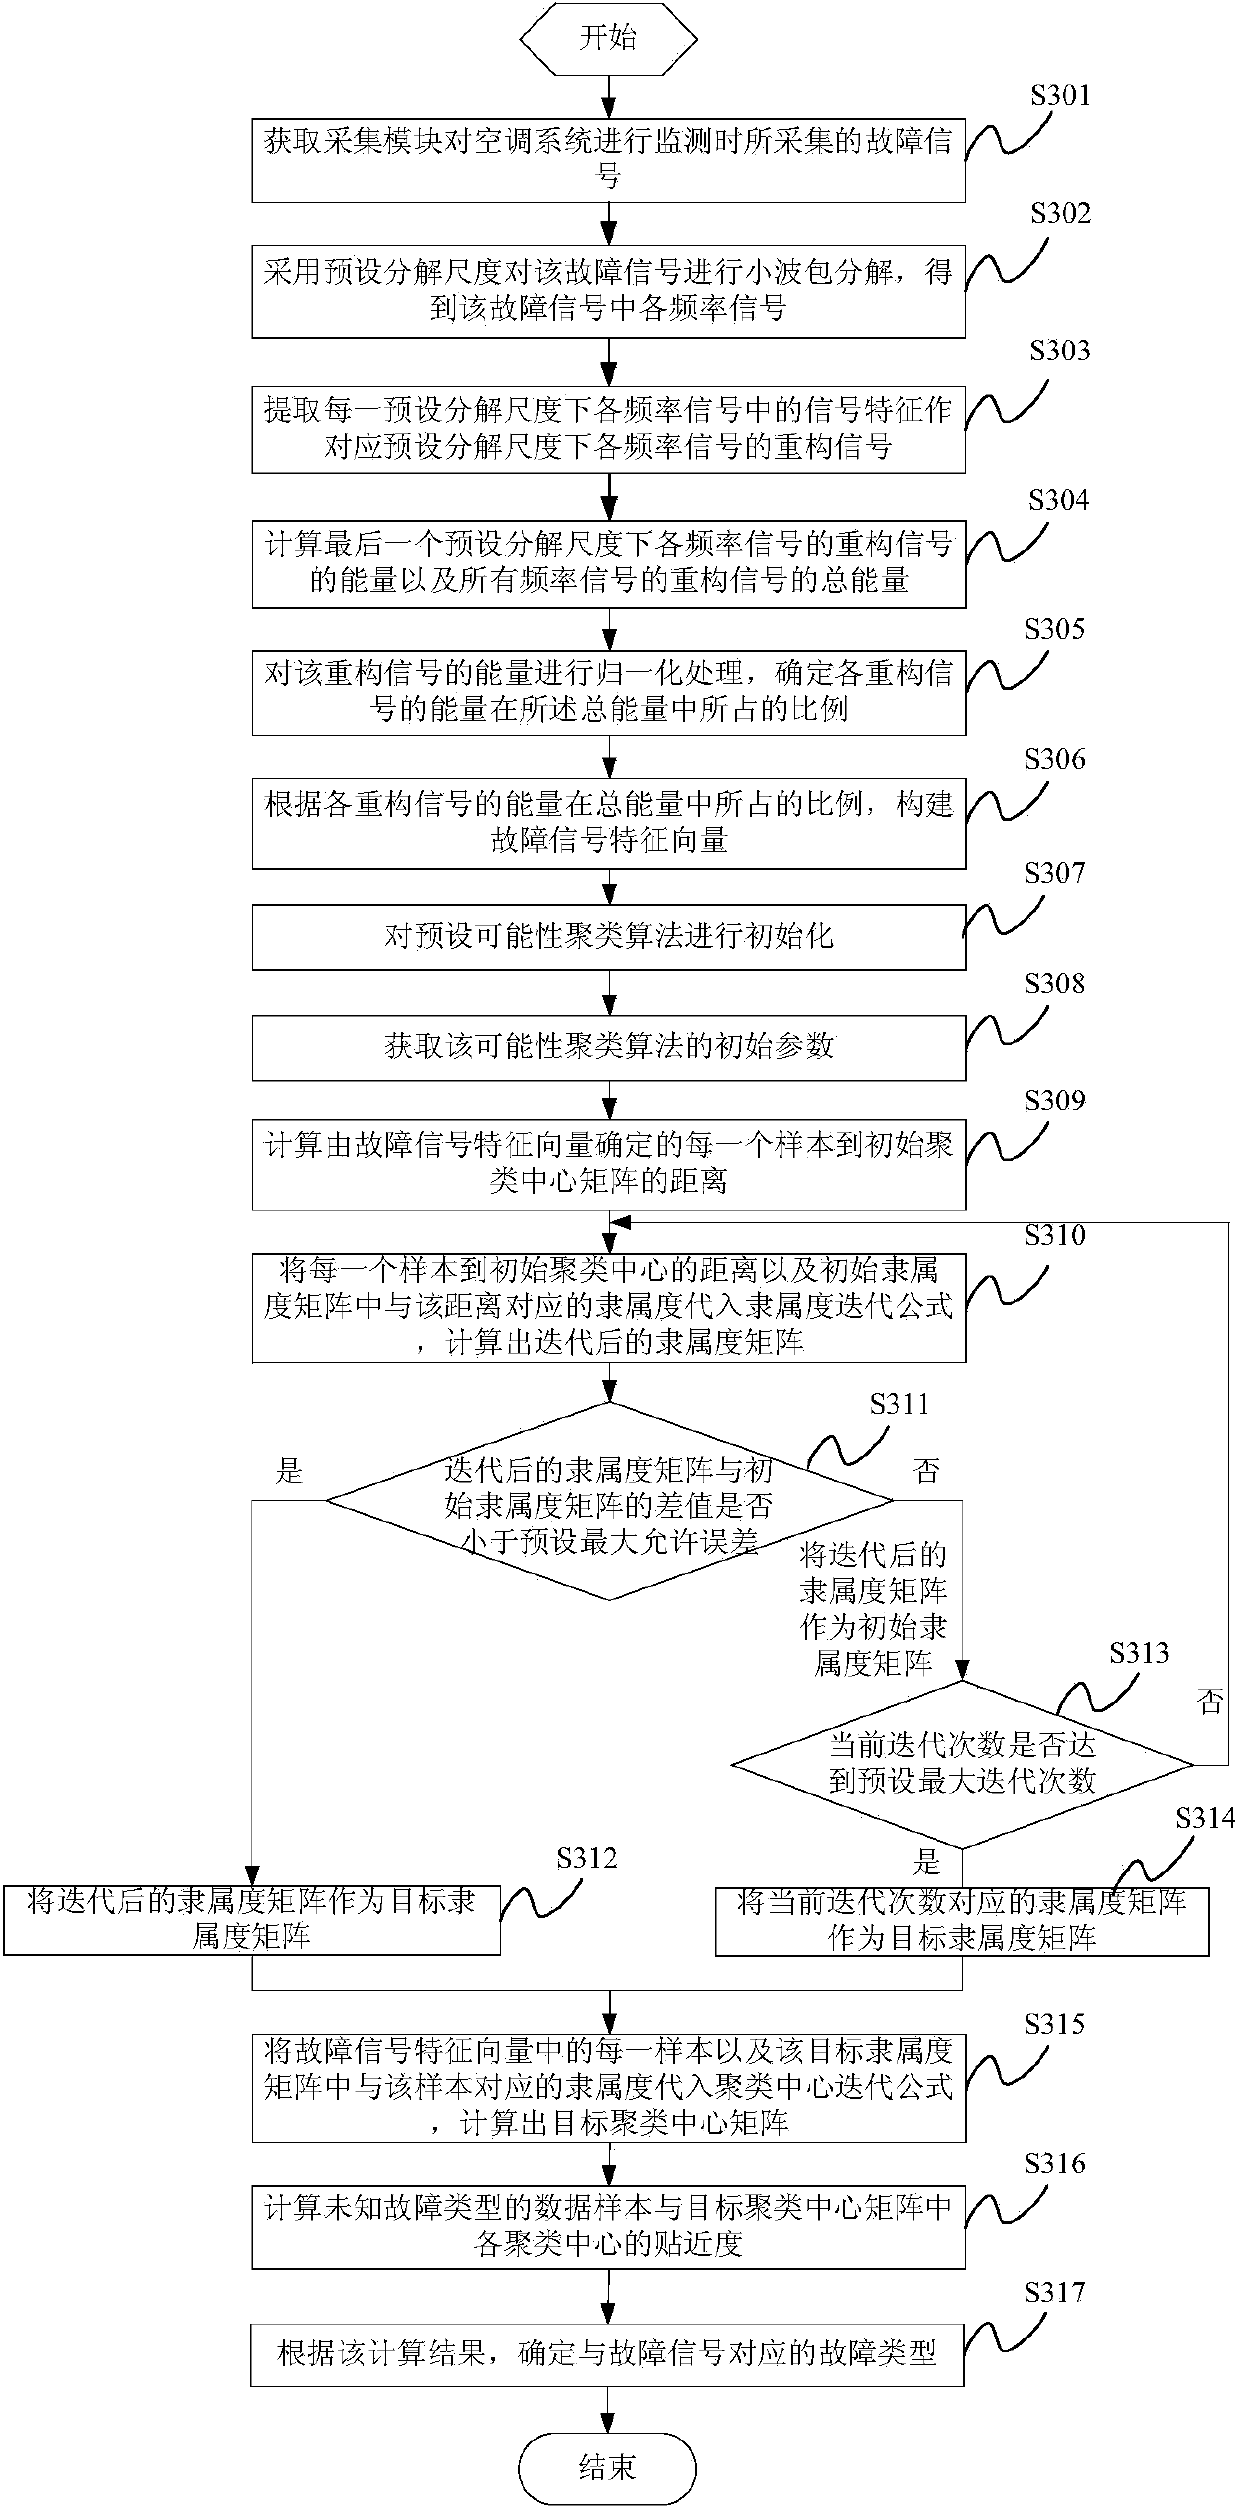 Urban rail vehicle air conditioner system fault diagnosis method and device